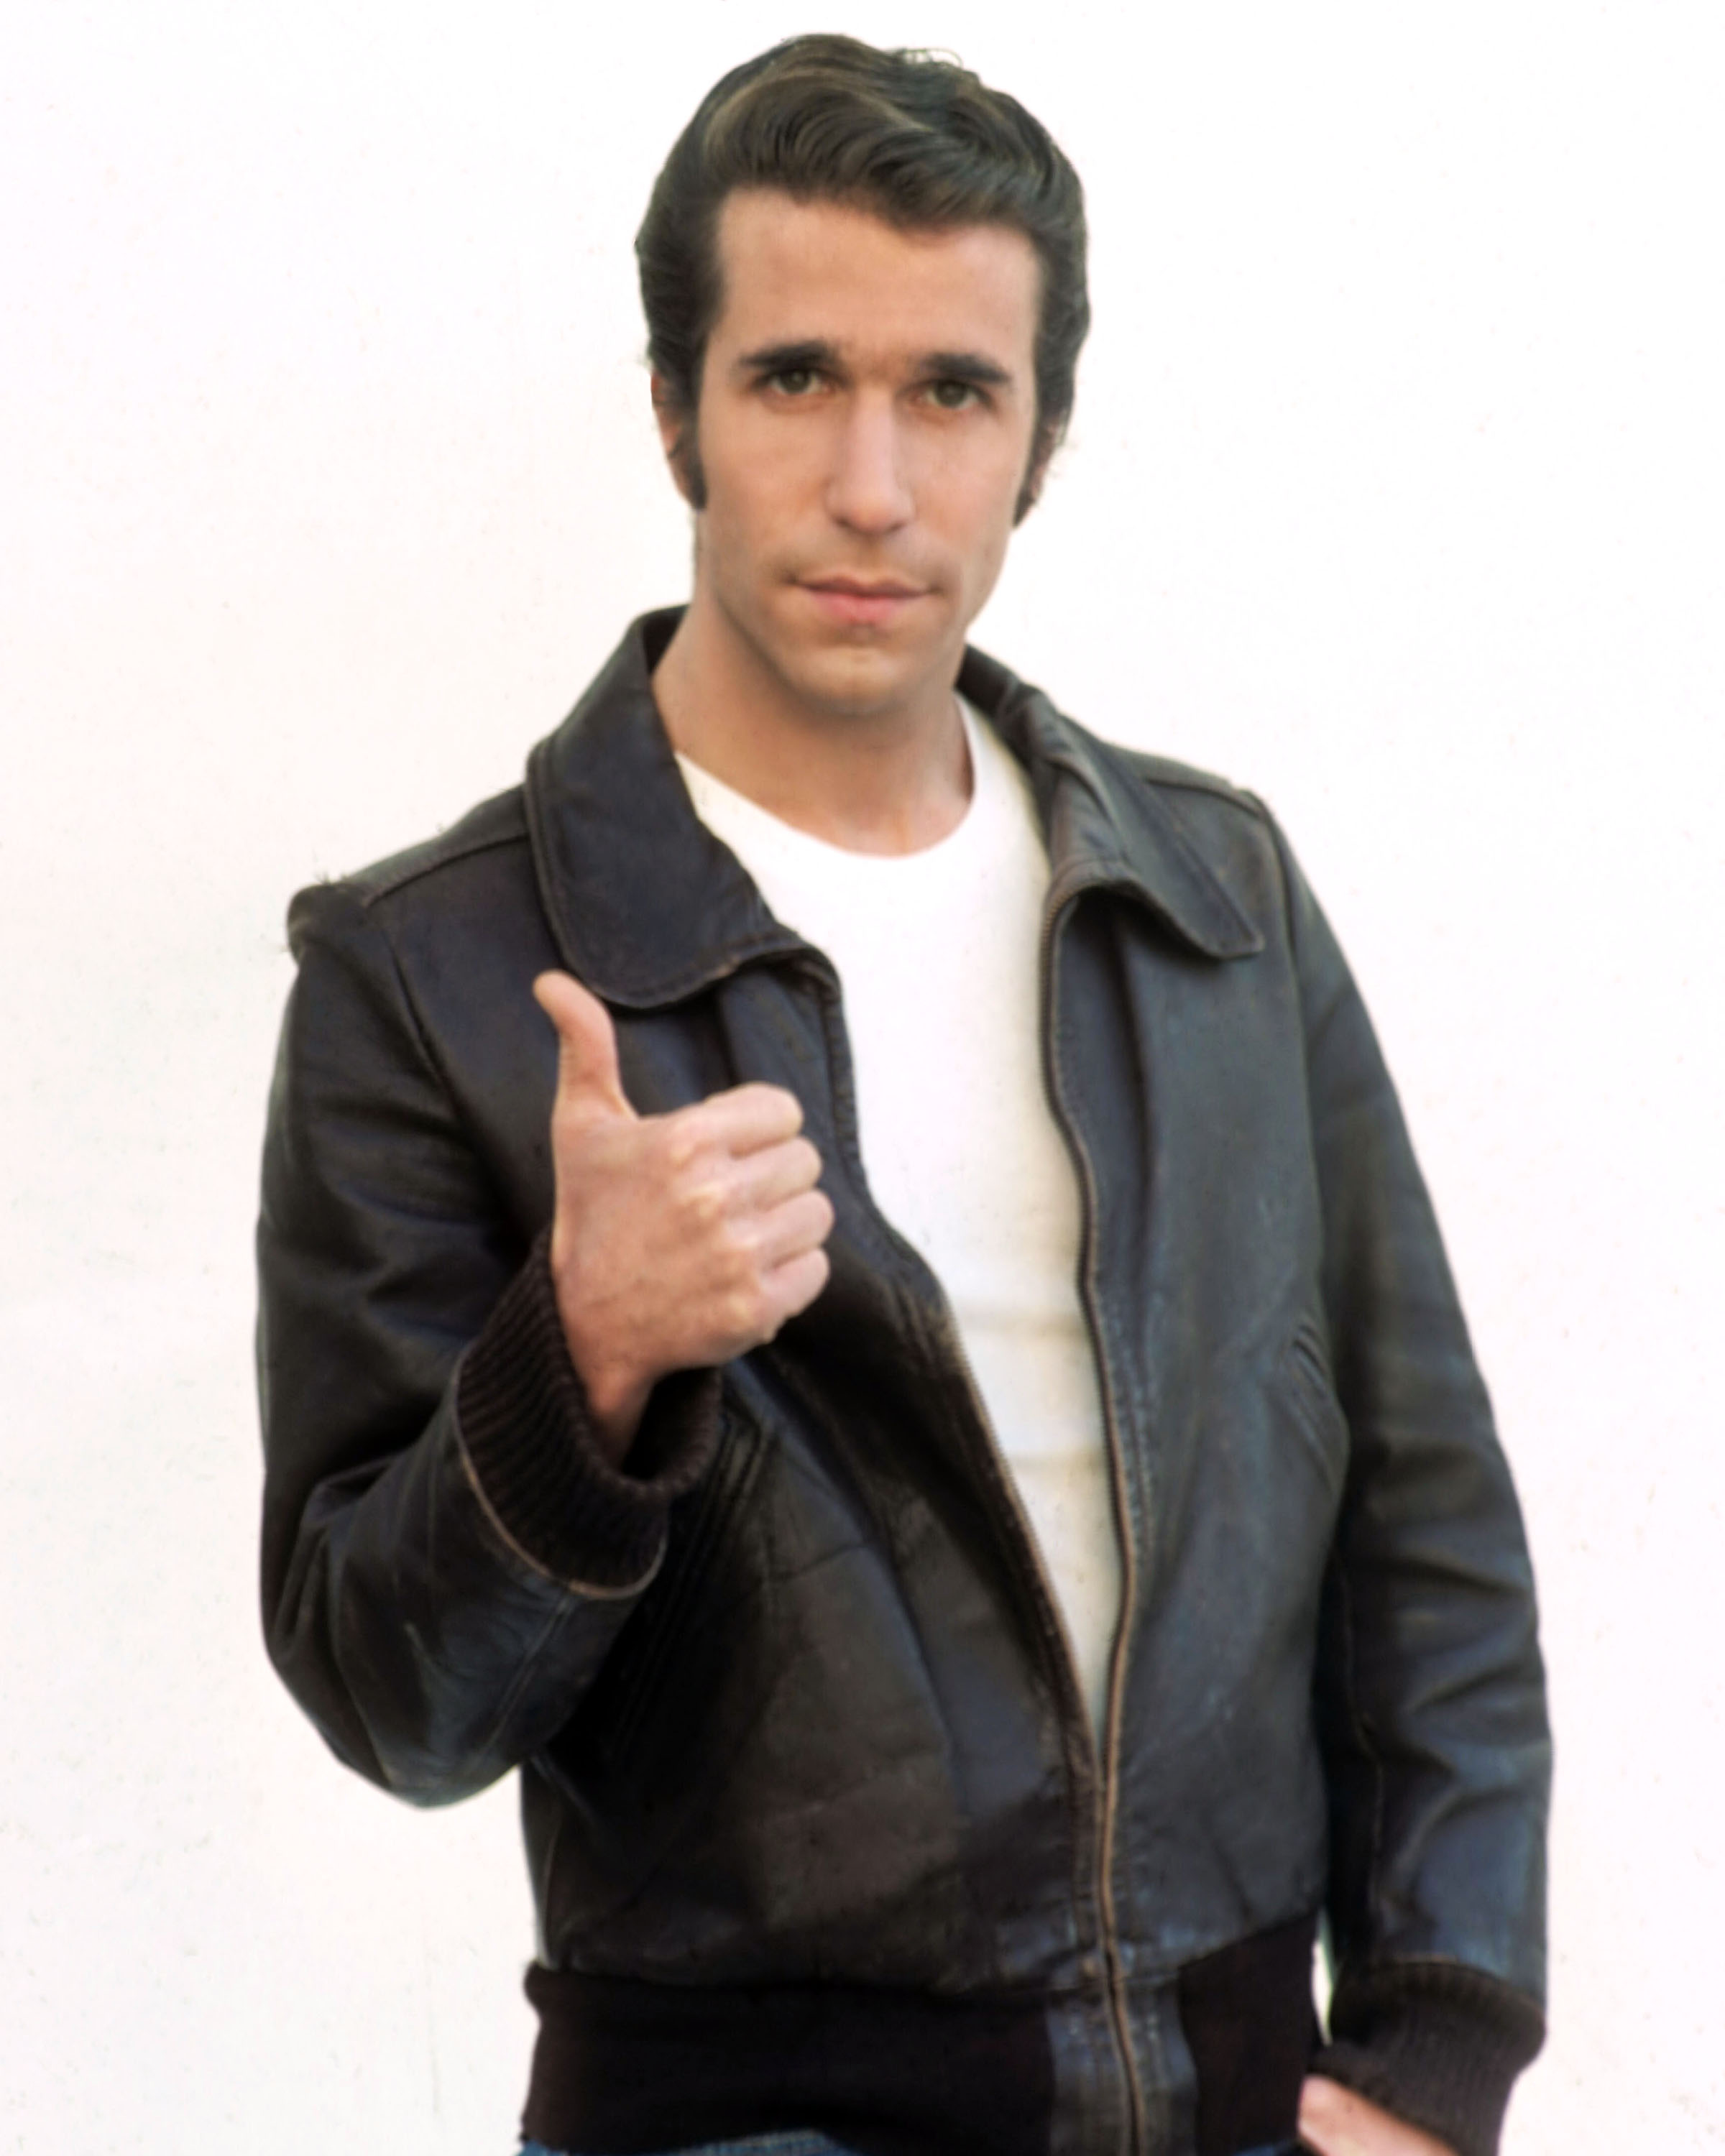 Henry Winkler, as the iconic Fonz, in a classic leather jacket and white tee, circa 1977, for the legendary series "Happy Days" | Source: Getty Images